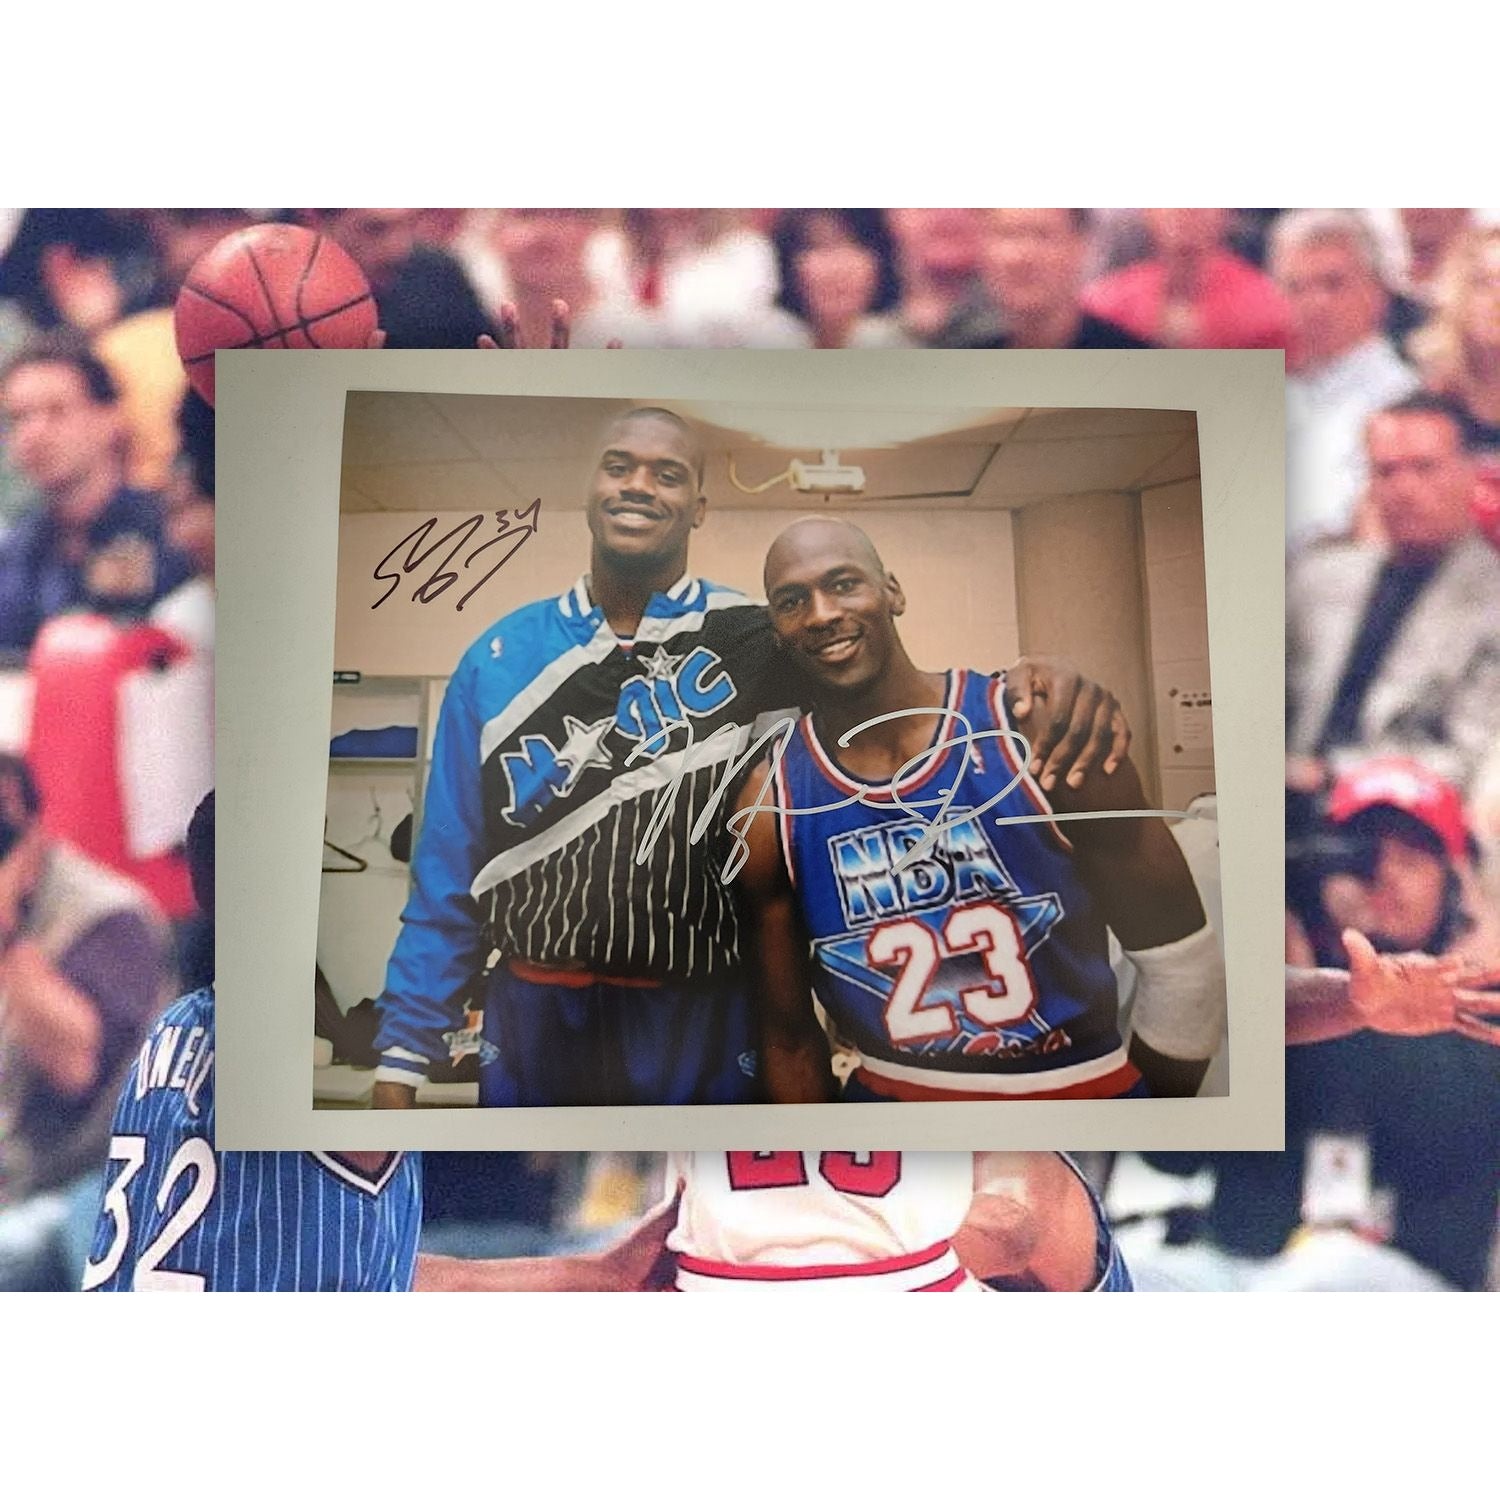 Shaquille O'Neal and Michael Jordan 8x10 photo signed with proof